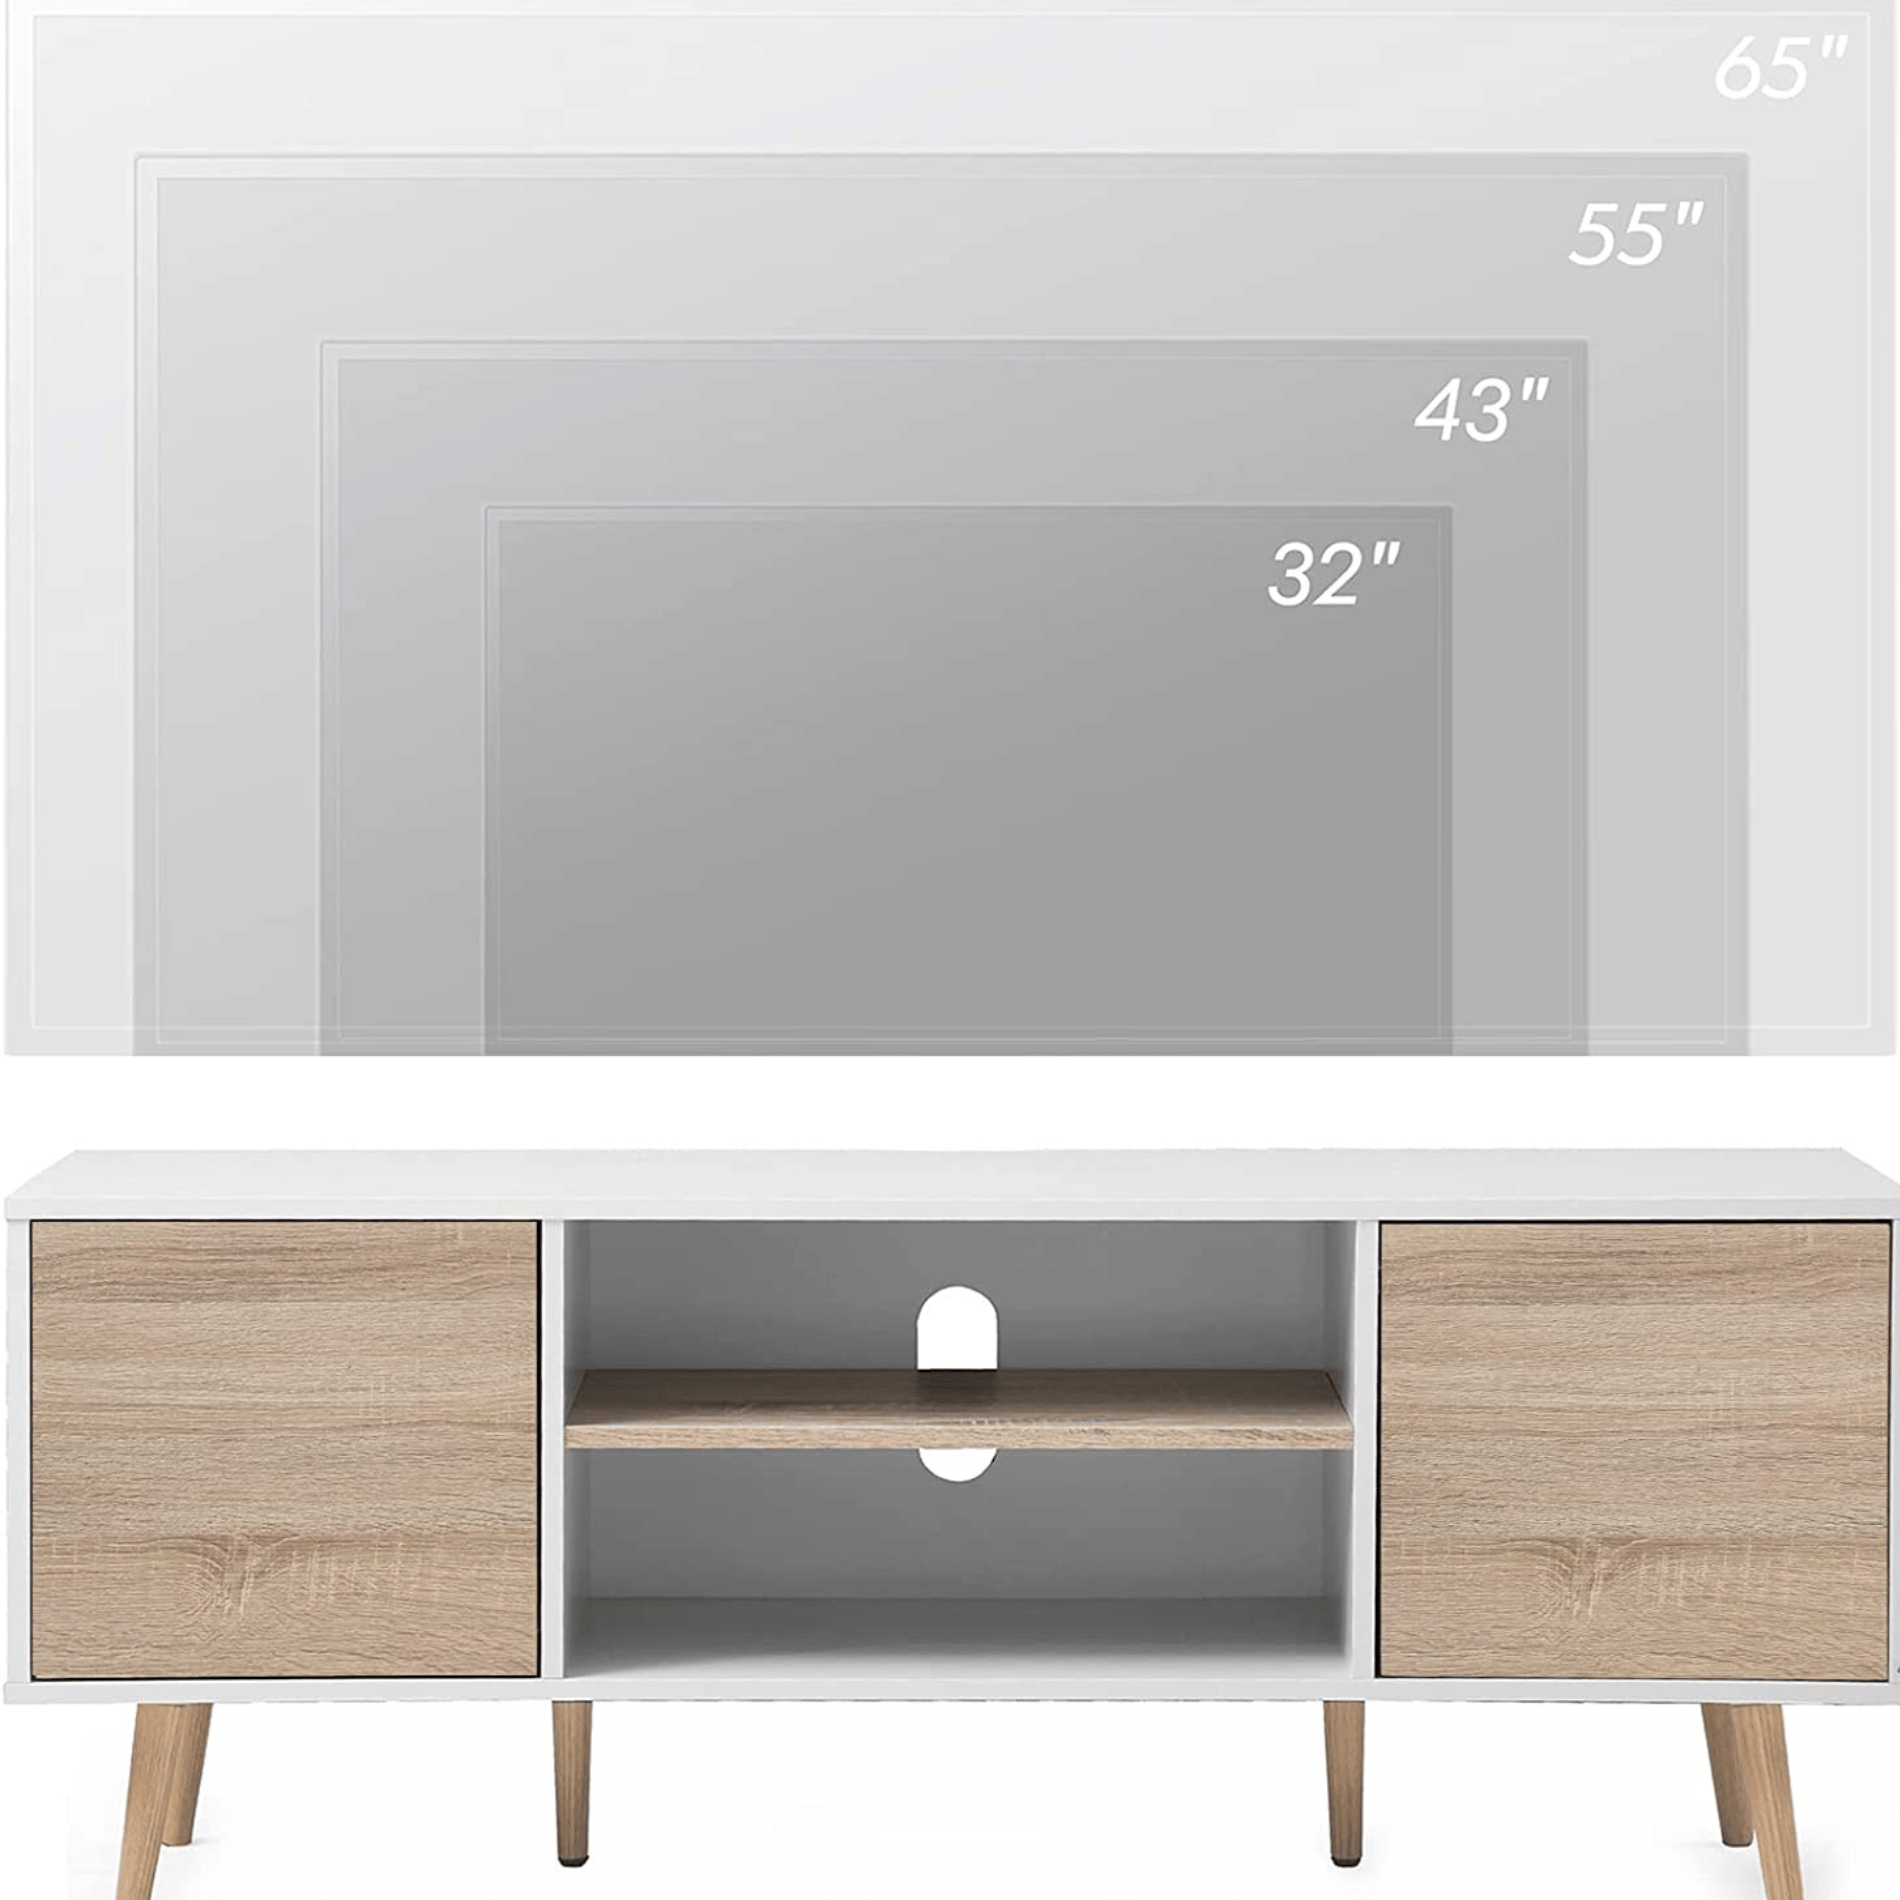 WAMPAT 53" Mid Century Modern Wood TV Stand for 60 Inch TV, Home Entertainment Center TV Cabinet Unit, White & Oak